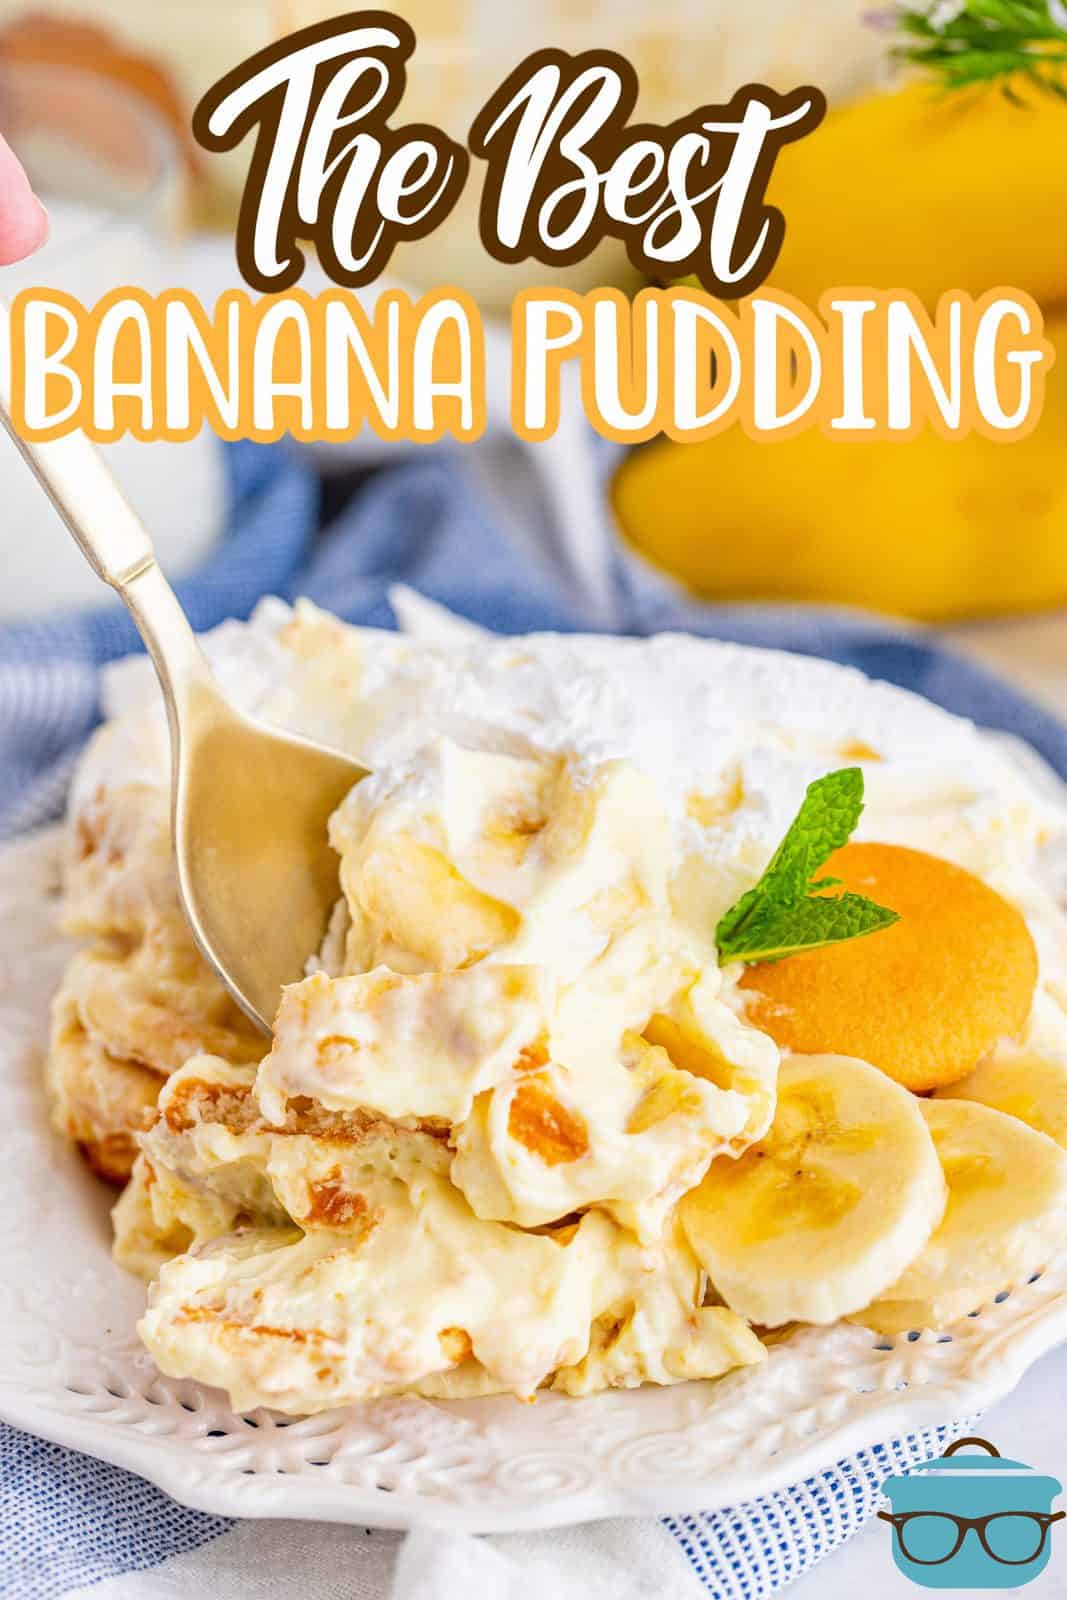 The Best Banana Pudding recipe from The Country Cook, serving of banana pudding on a small white plate with a spoon inserted into pudding.